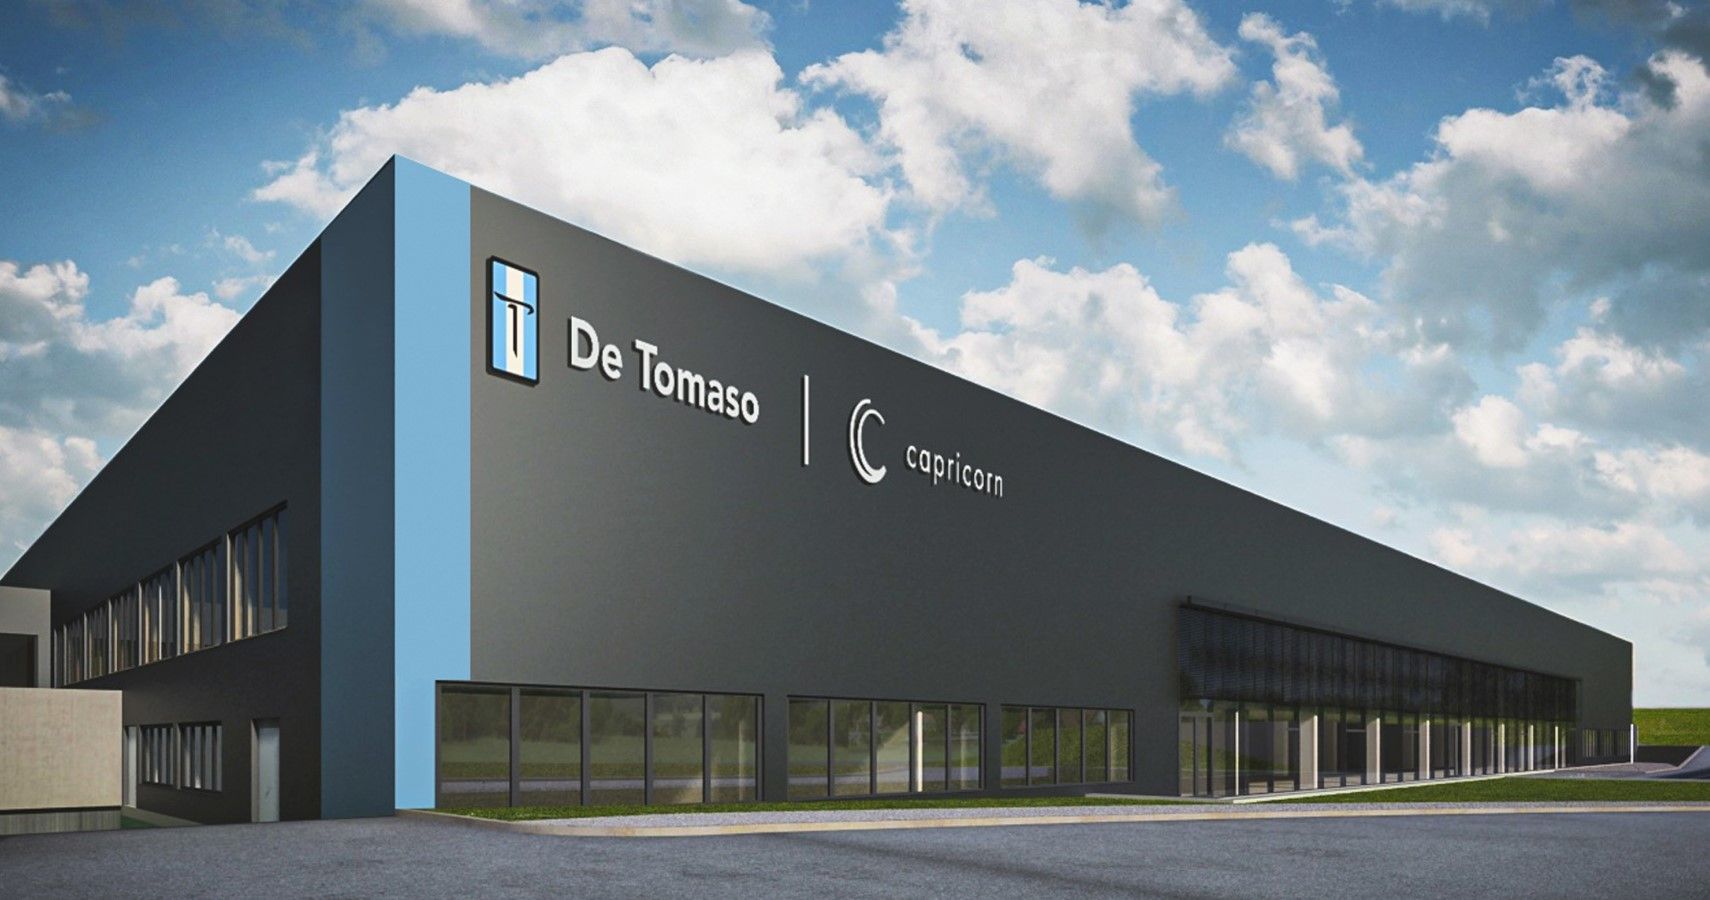 De Tomaso X Capricorn facility being made at the Nürburgring